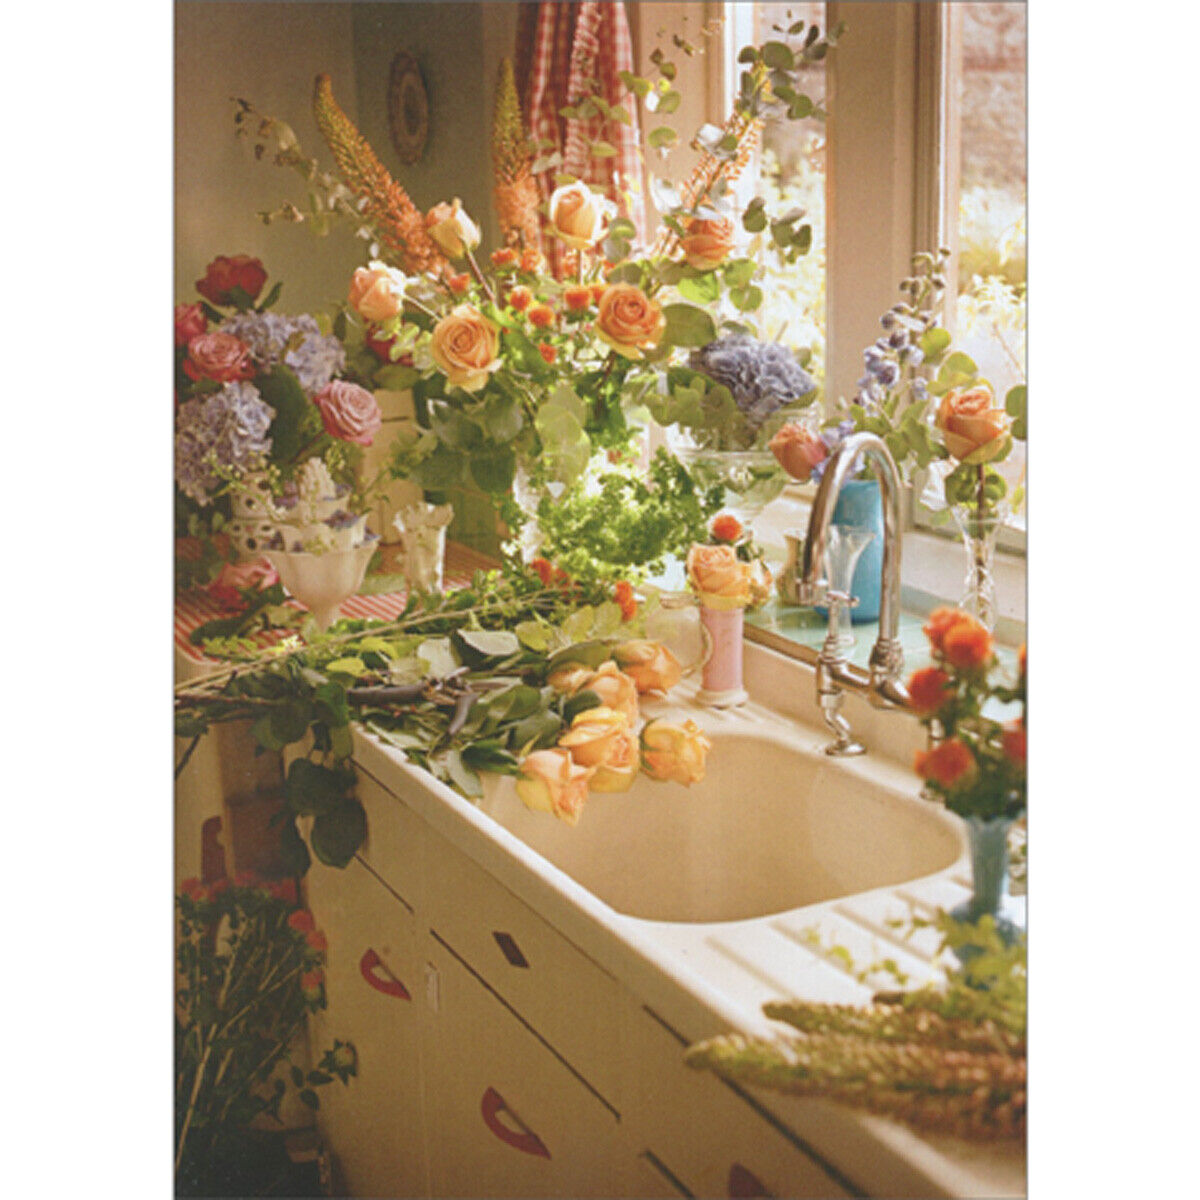 photo of vintage kitchen sink filled with colorful flowers